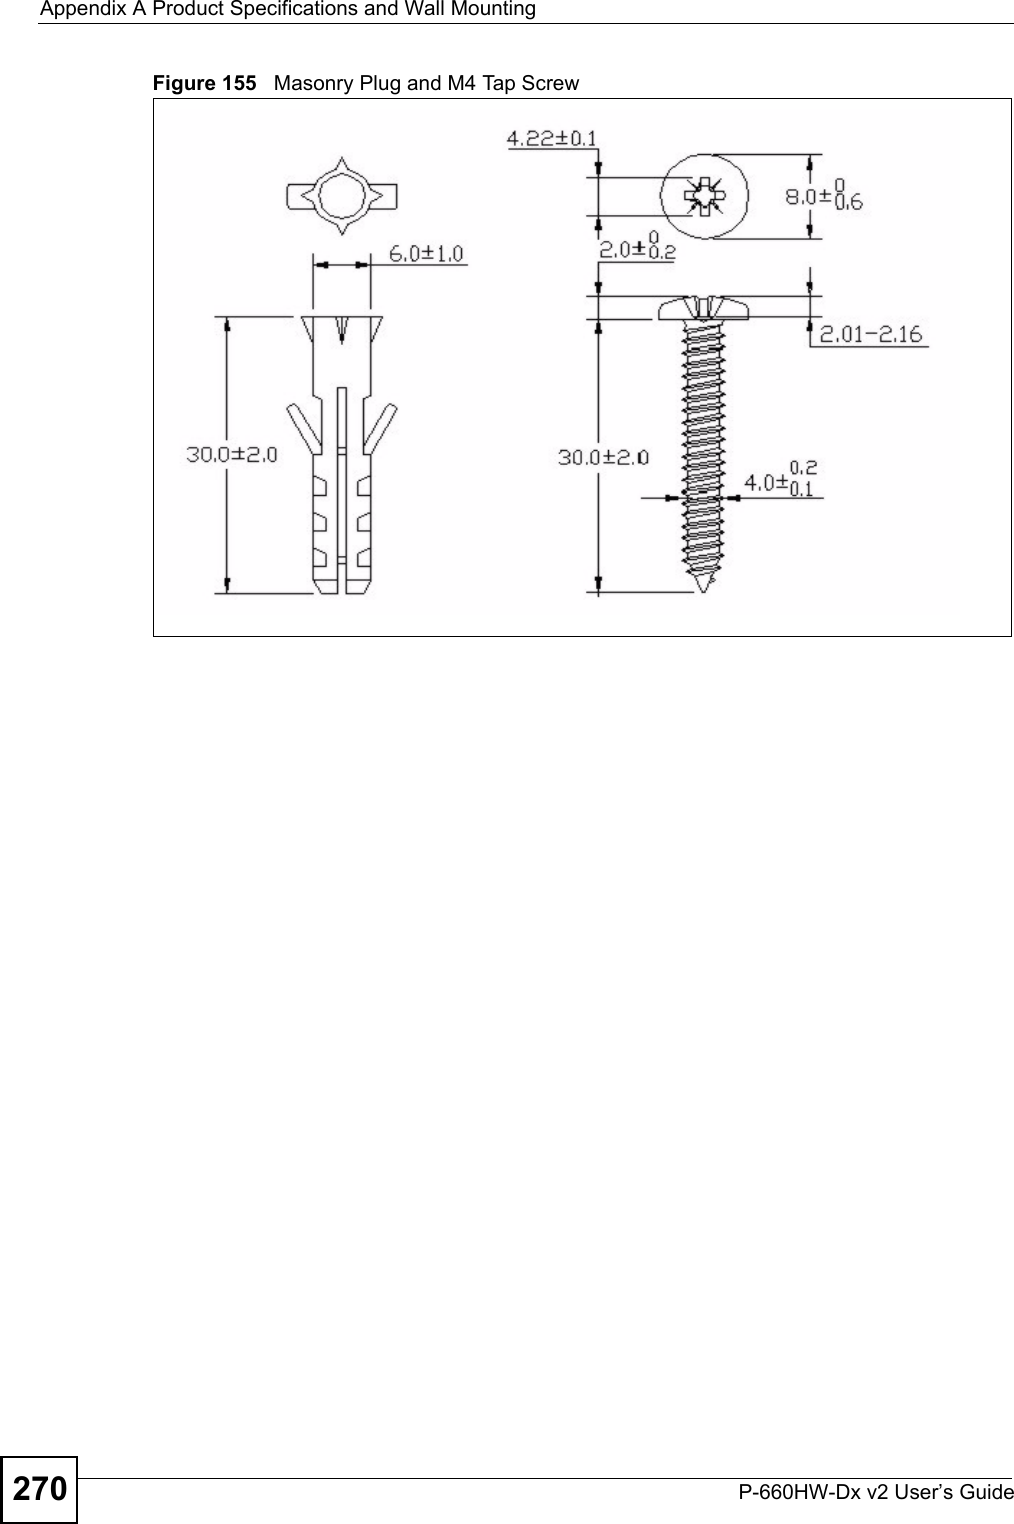 Appendix A Product Specifications and Wall MountingP-660HW-Dx v2 User’s Guide270Figure 155   Masonry Plug and M4 Tap Screw